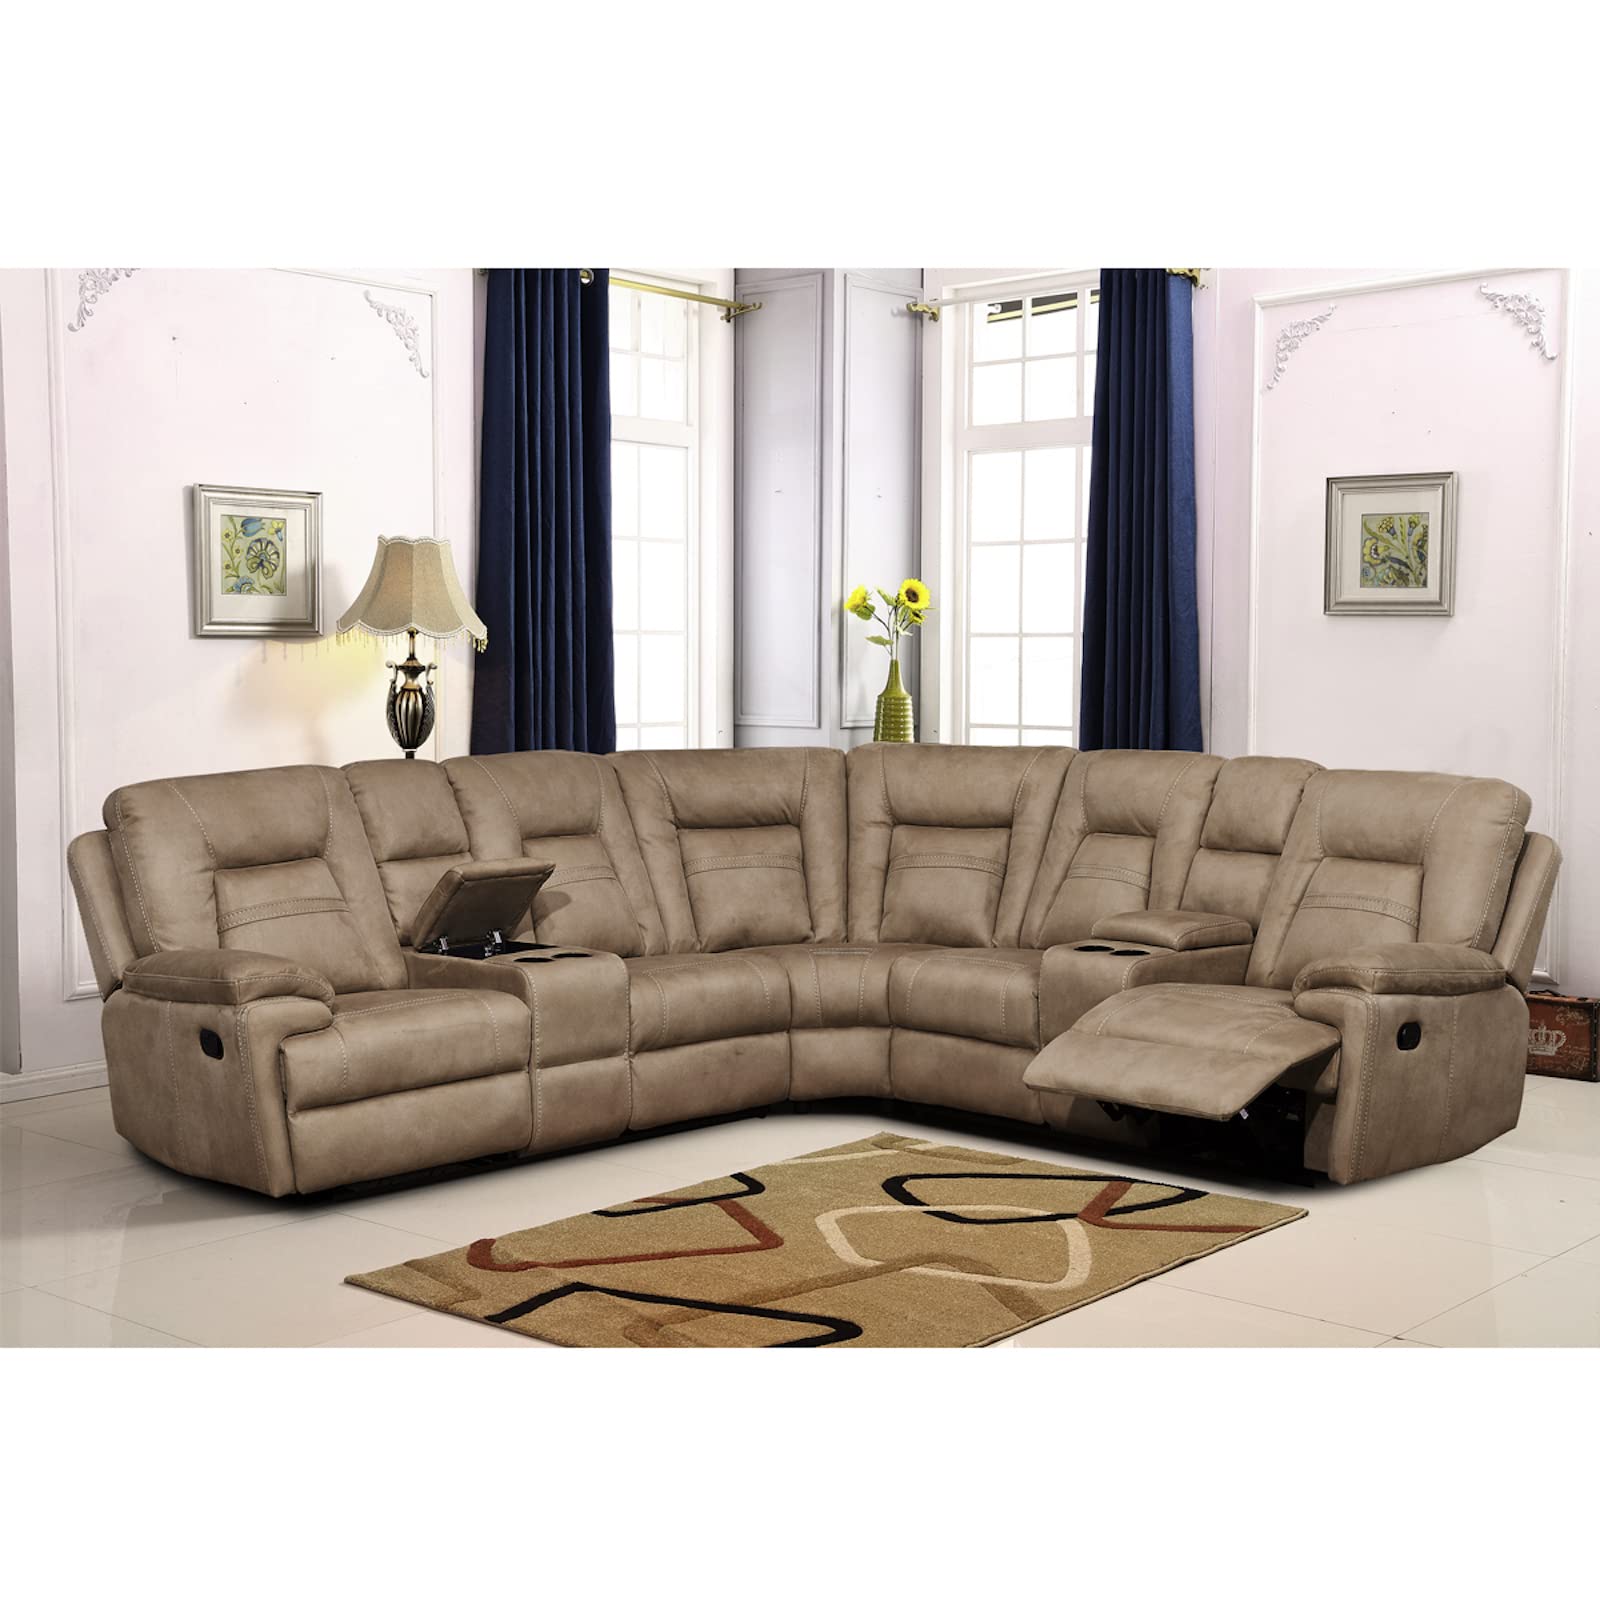 Betsy Furniture Recliner